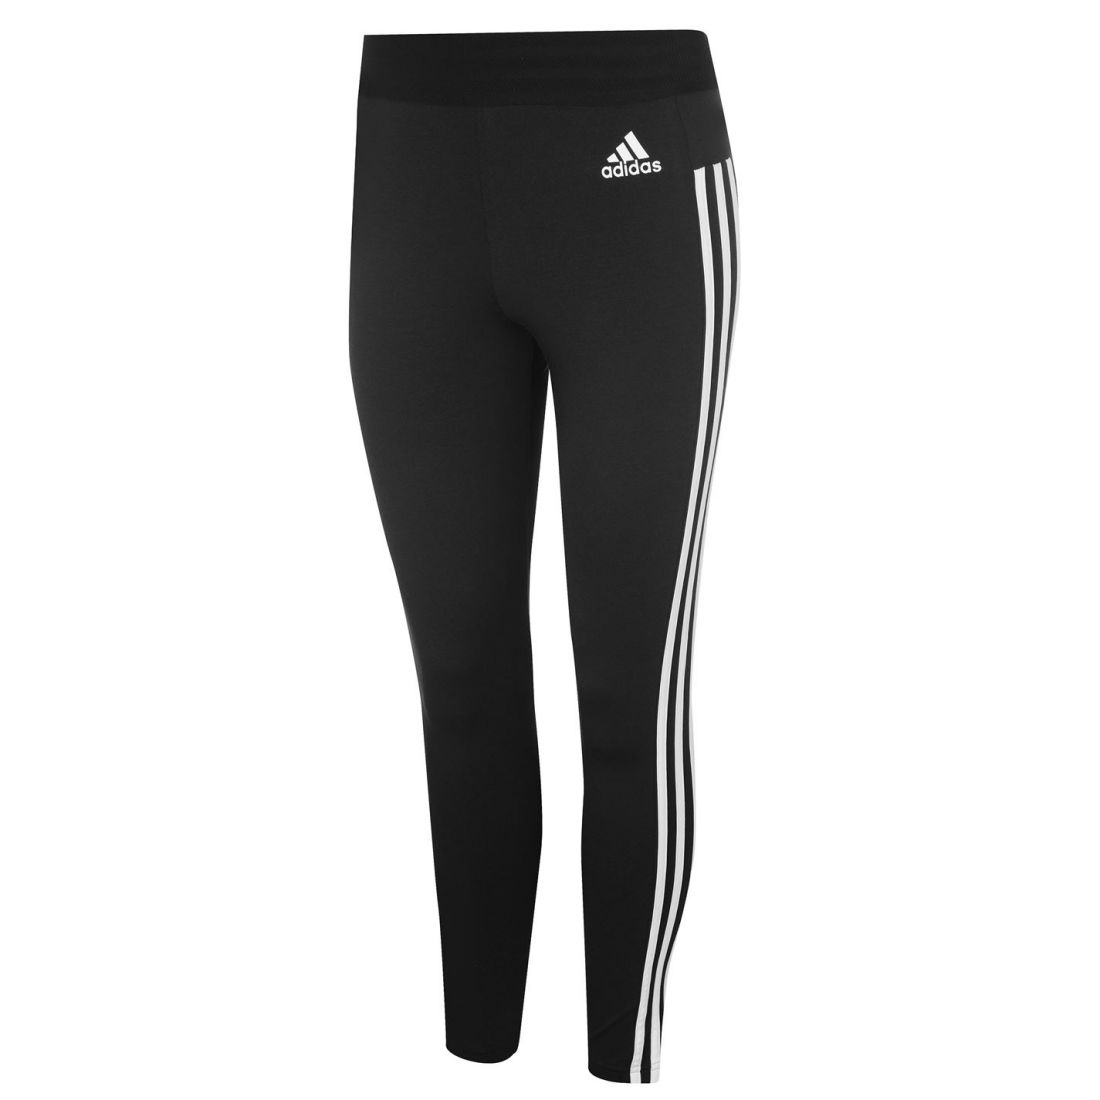 adidas Ladies Ess 3S Tights Stretchy Sport Active Bottoms Clothing | eBay